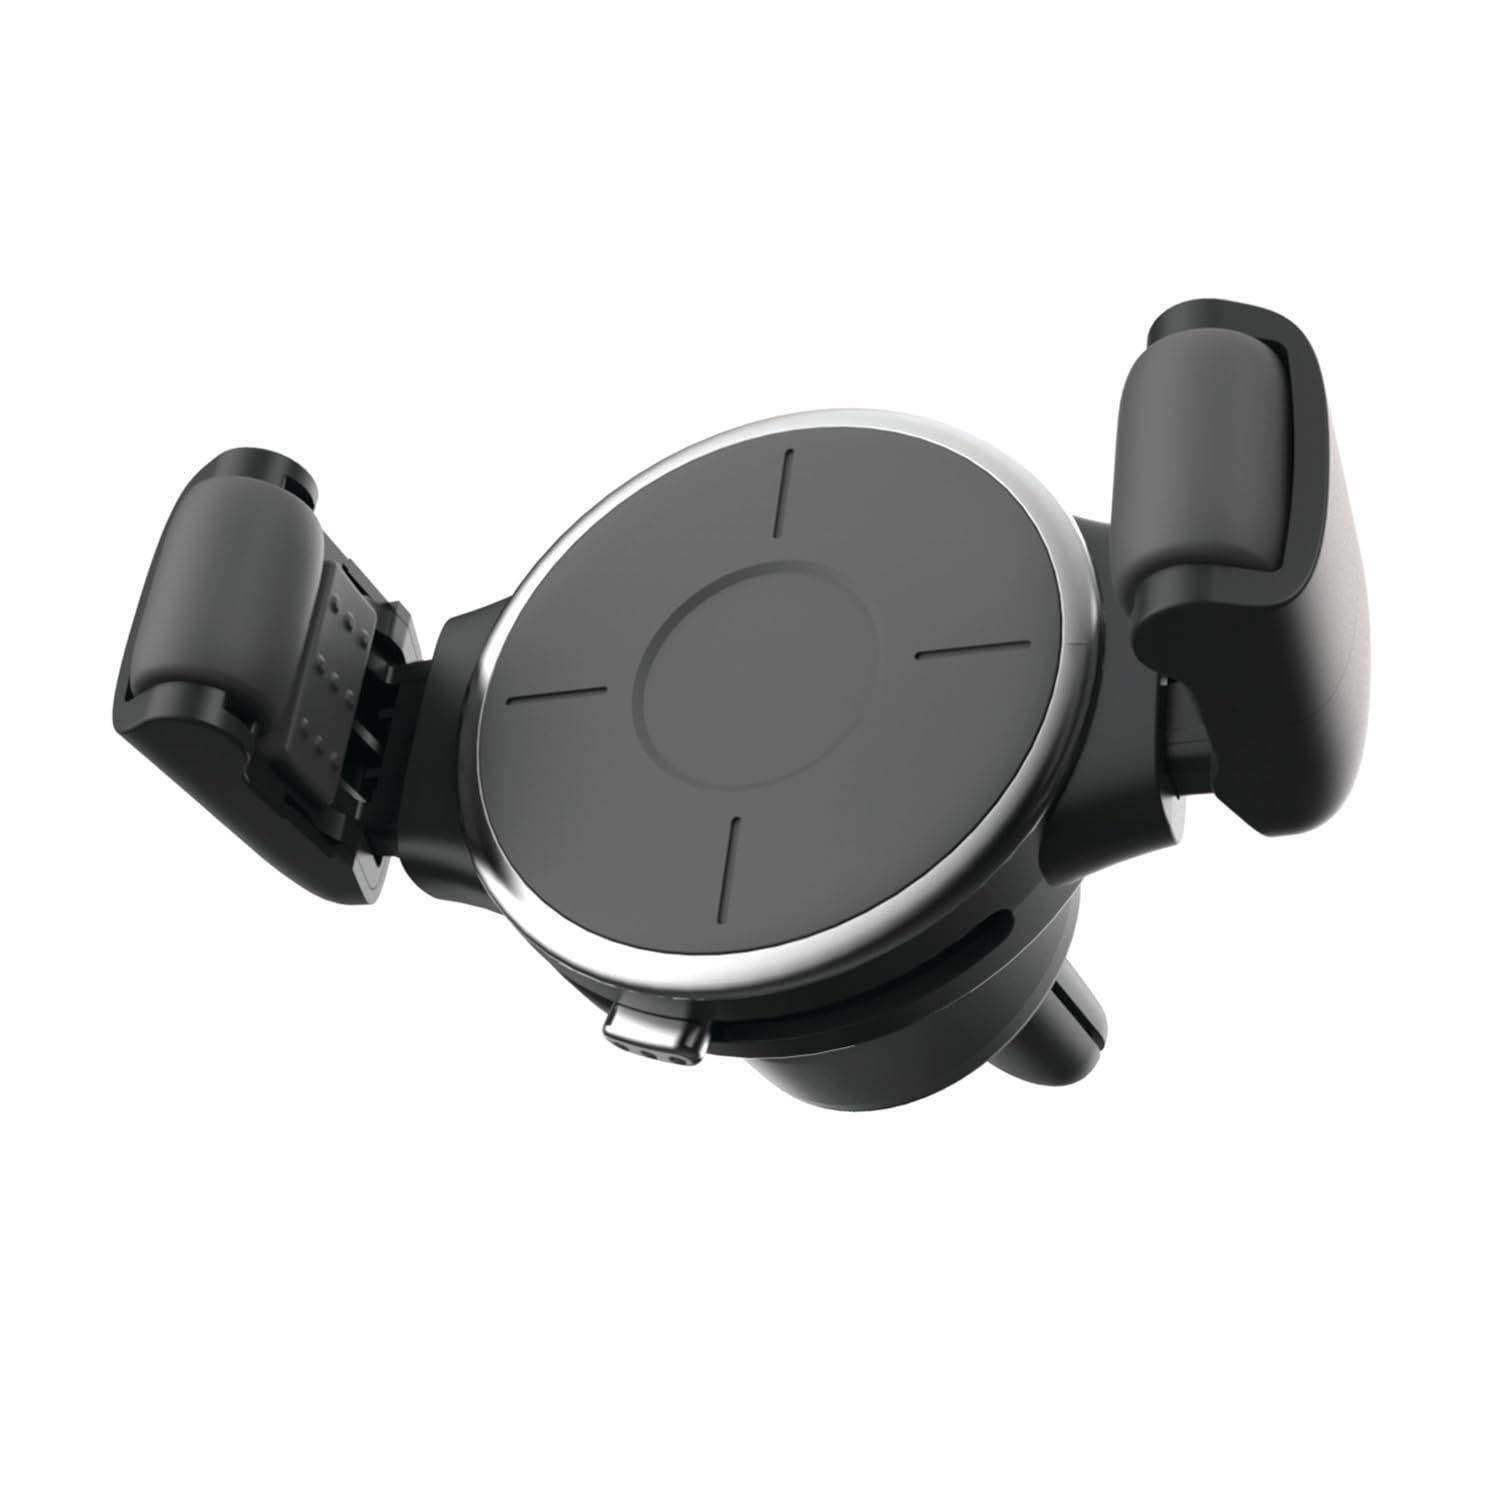 Bracketron OneClick Smartphone Clamp Vent Mount $6 + Free Shipping w/ Prime or on $35+